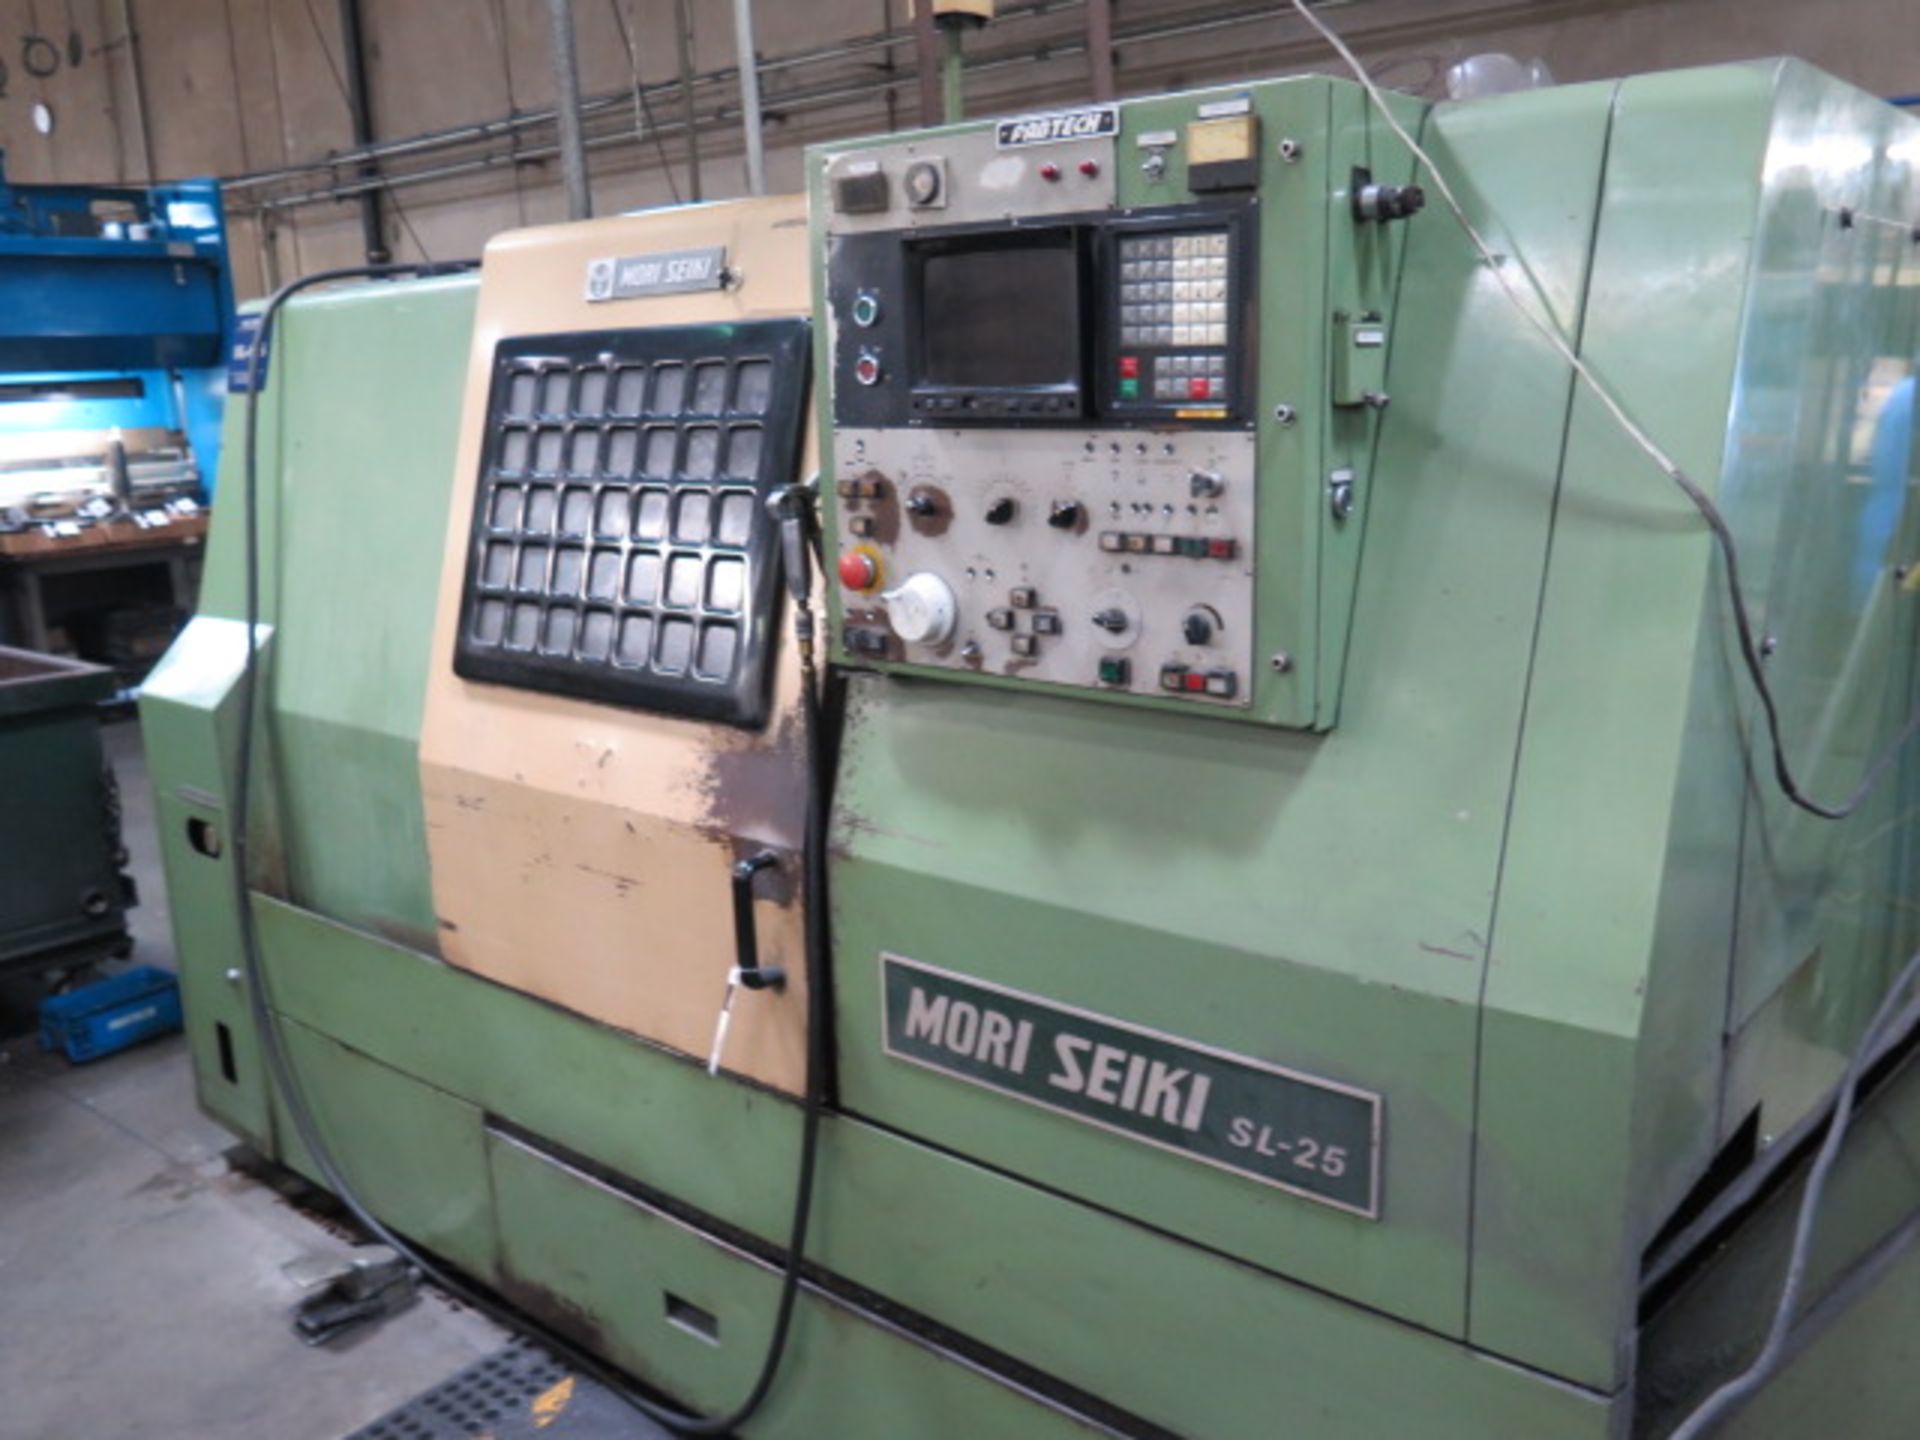 Mori Seiki SL-25 CNC Turning Center s/n 2598 w/ Fanuc 10-T Controls, 10-Station Turret, SOLD AS IS - Image 3 of 15